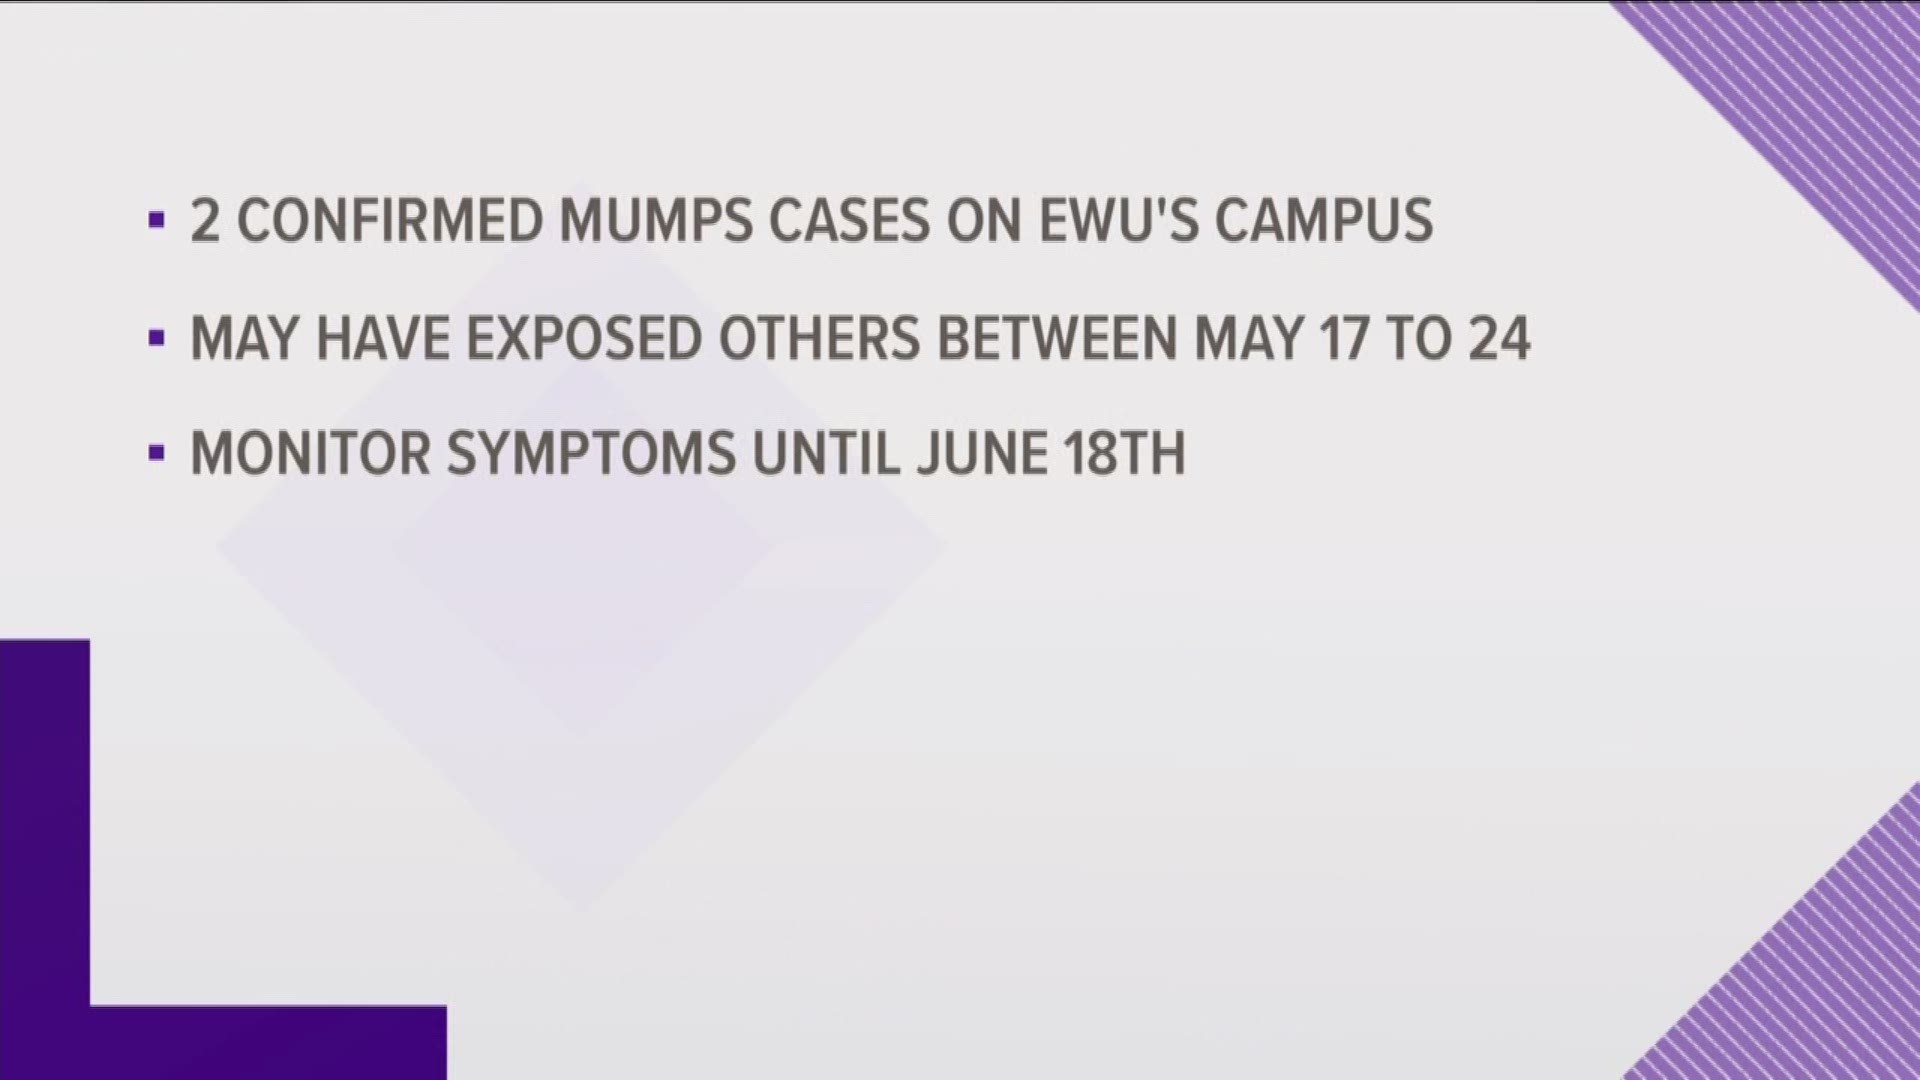 In an email sent out to people on campus, a student may have exposed others to the illness between May 17-24.